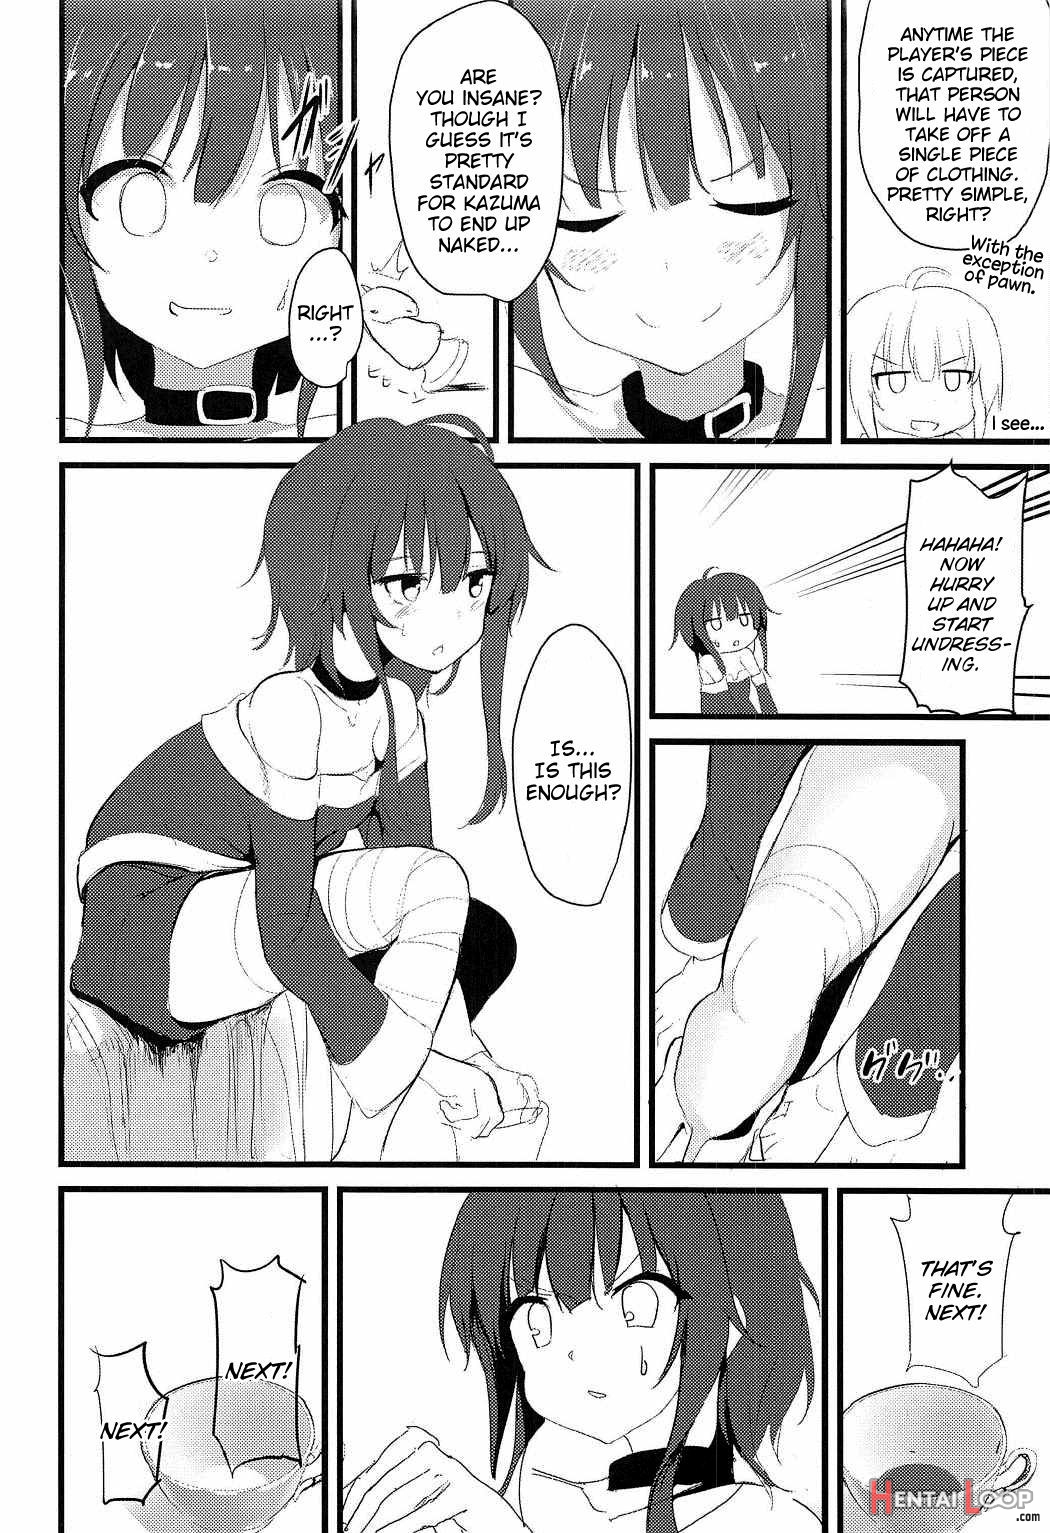 Megumin page 5